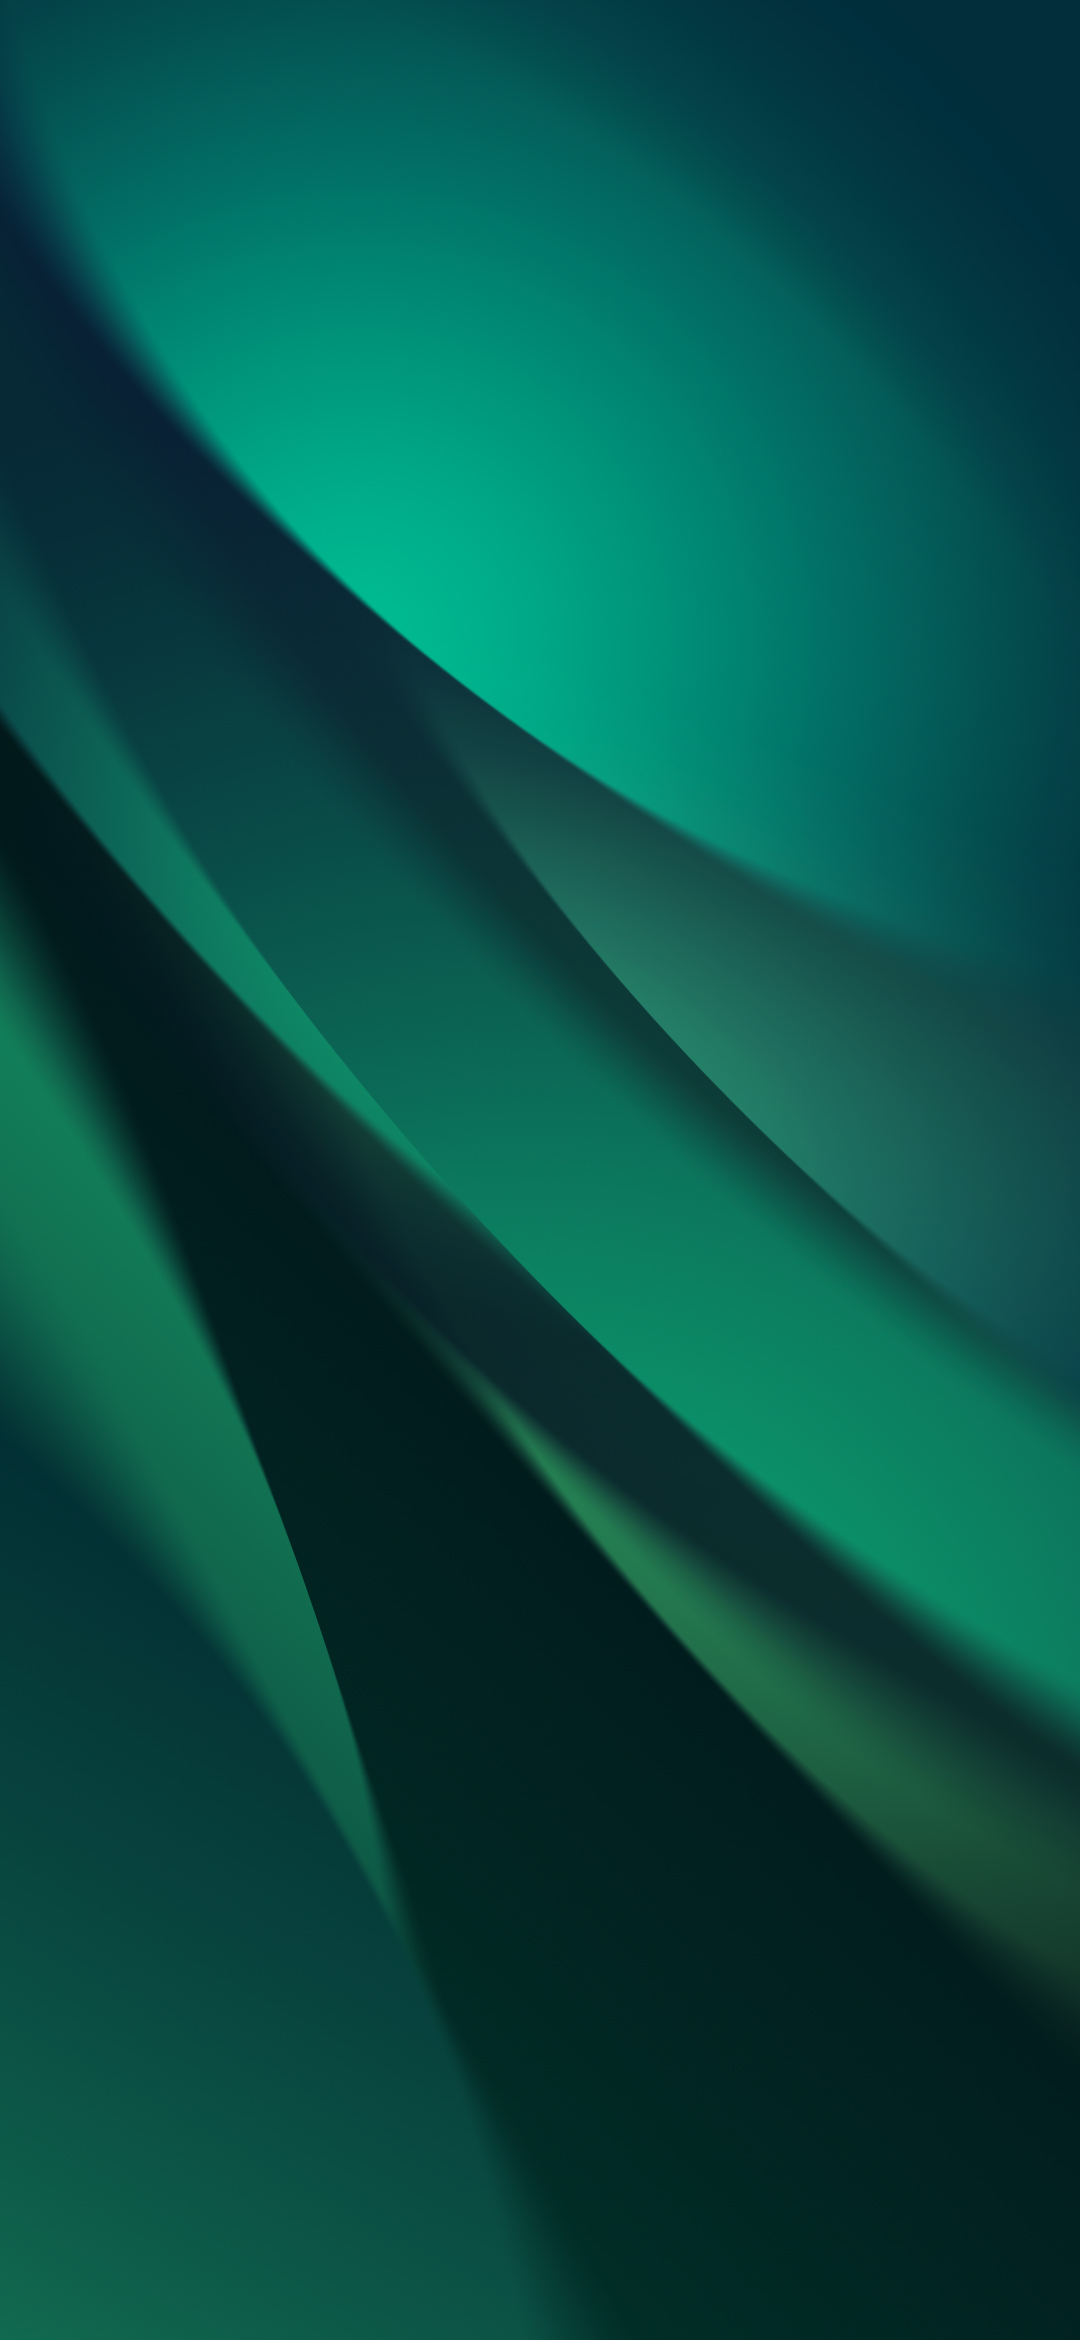 wallpaper of oppo,green,blue,aqua,turquoise,teal